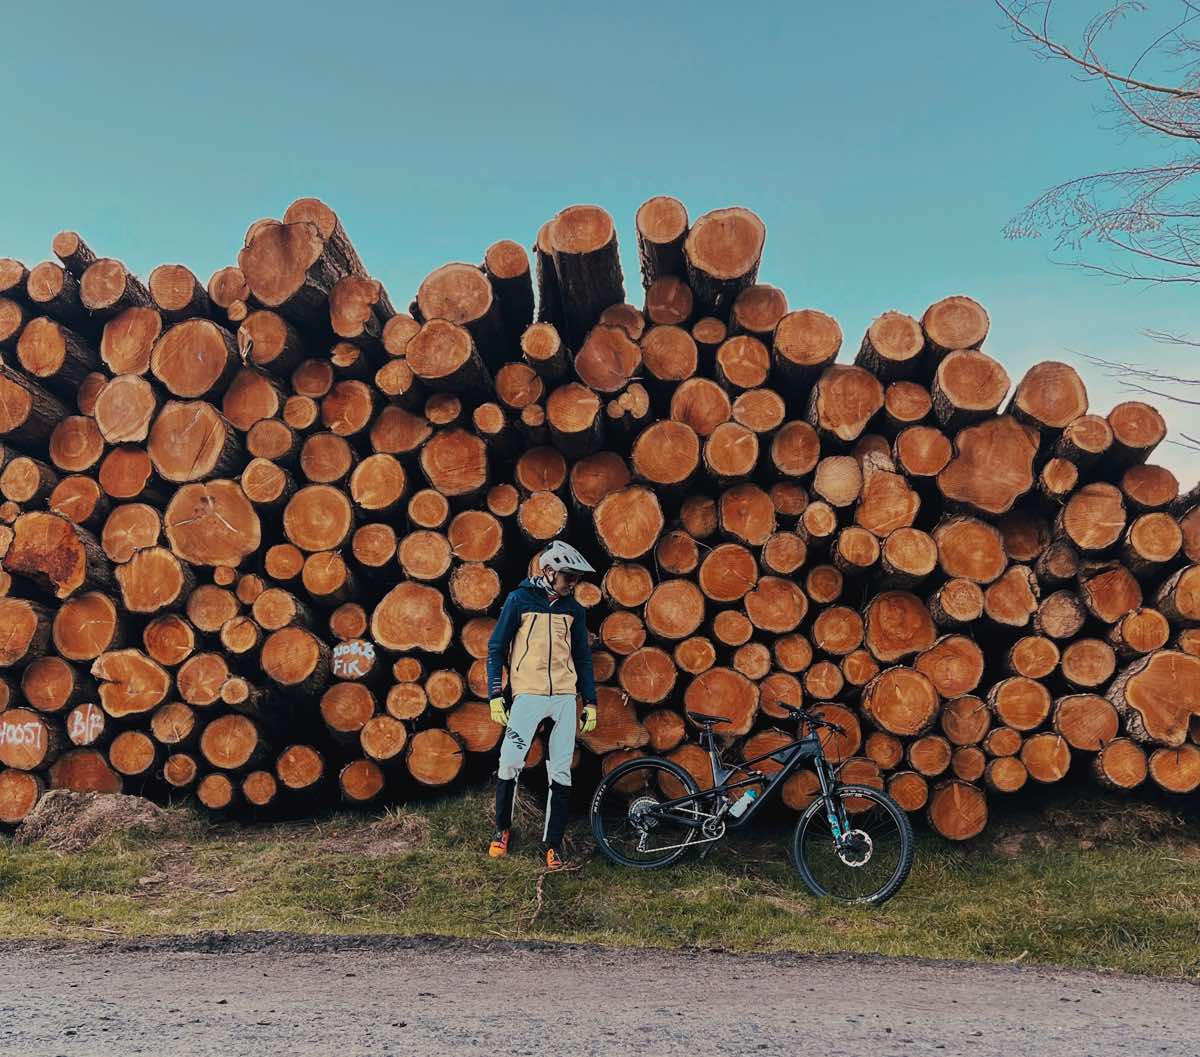 bikerumor pic of the day a cyclist stands in front of a pile of logs with their mountain bike, they are along a dirt road the the sky is clear and blue above the pile of logs.